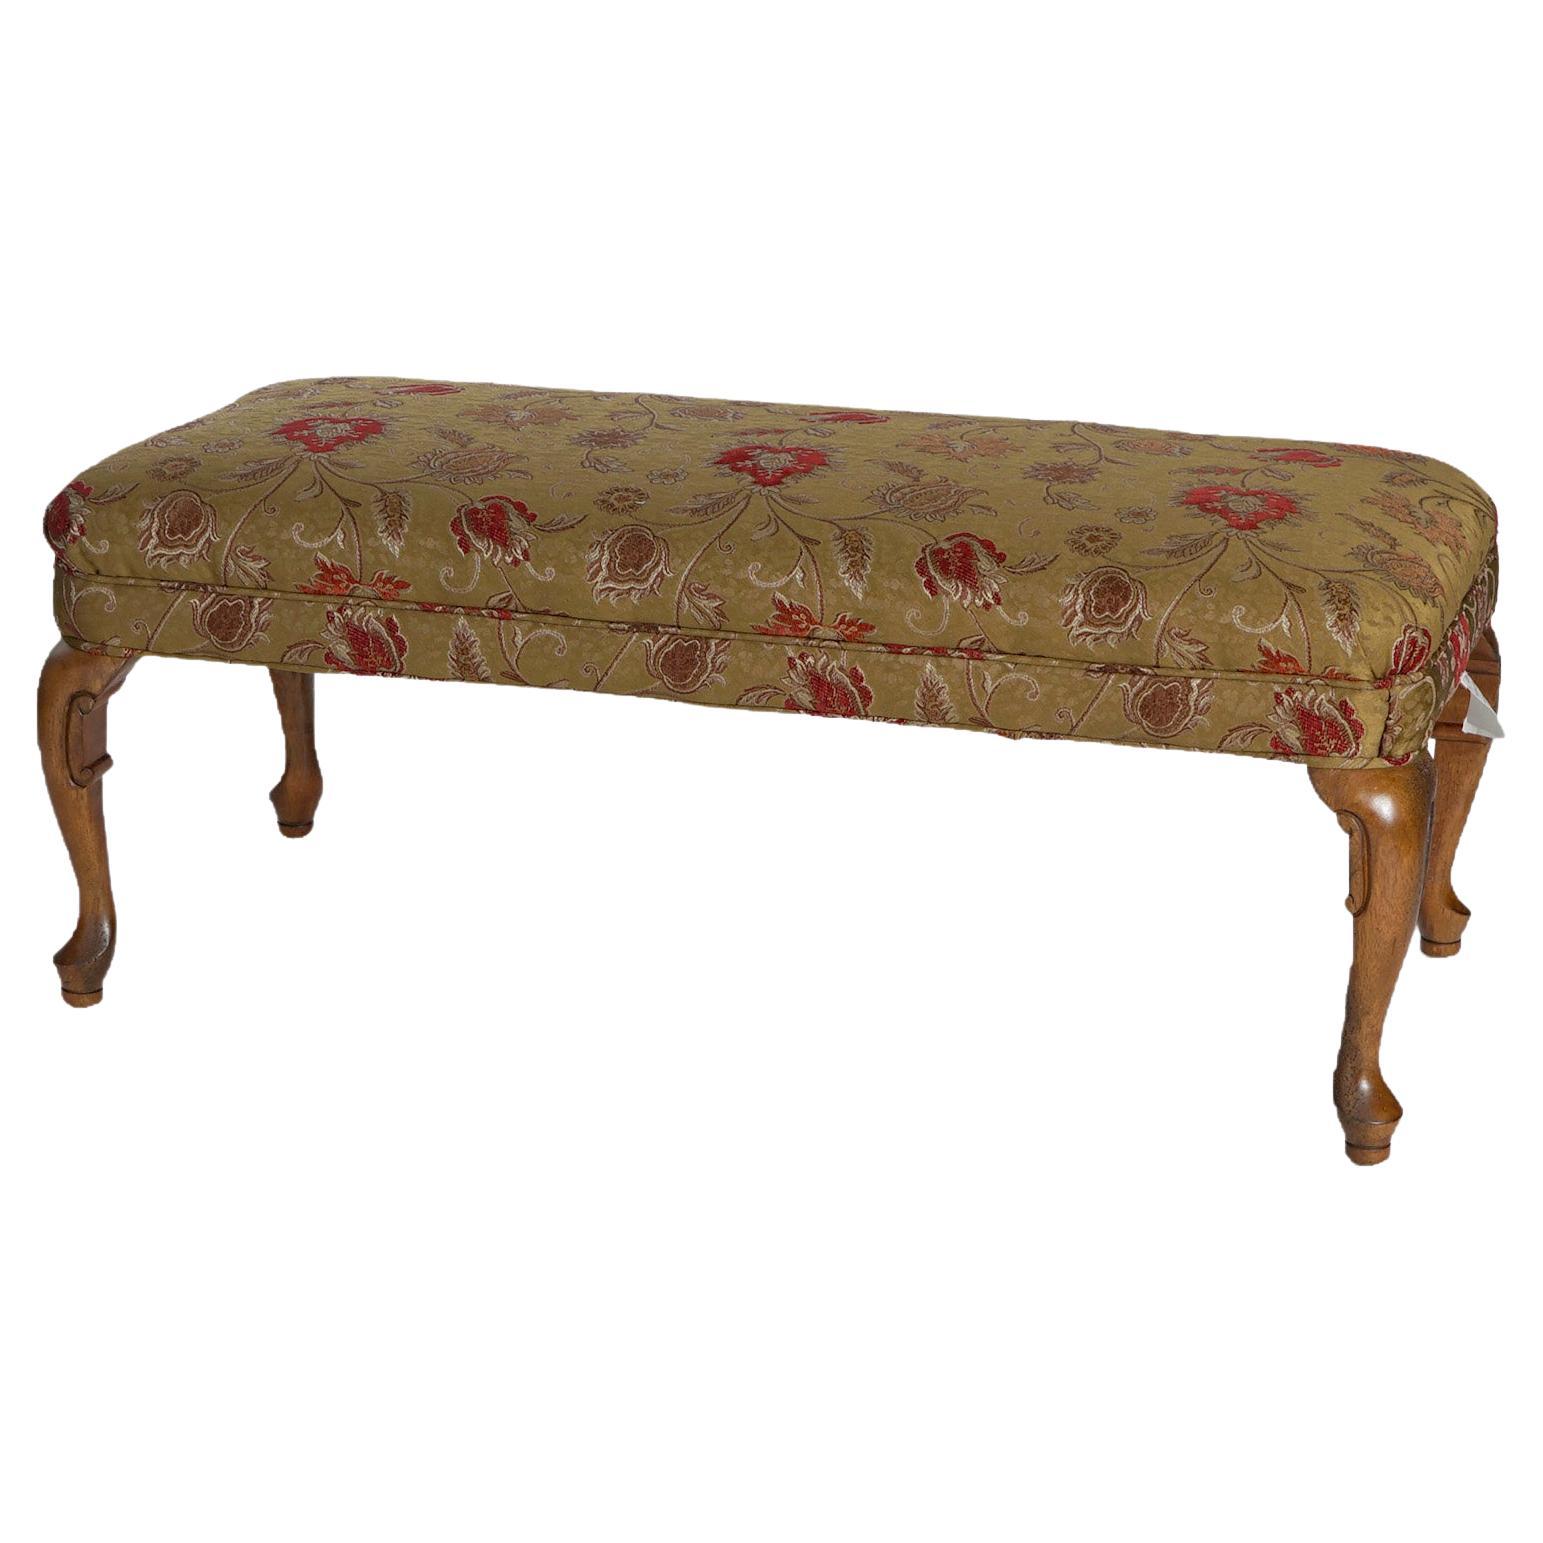 Queen Anne Style Upholstered Mahogany Long Bench 20th C